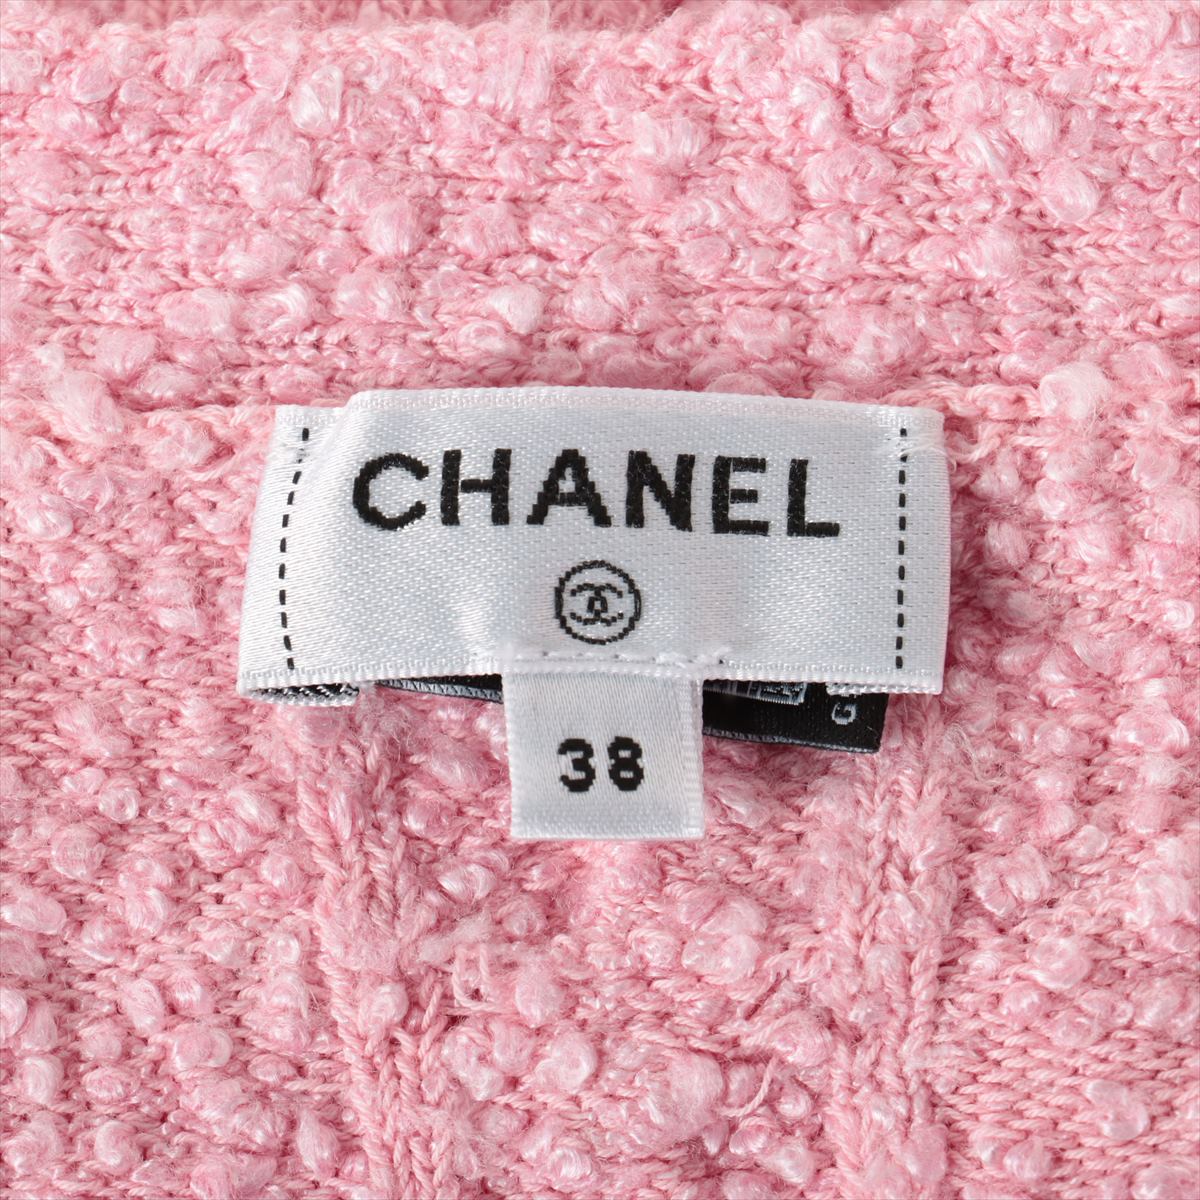 Chanel Coco Button P72 Cotton & Rayon Cardigan 38 Ladies' Pink  P72177 Long cardigan